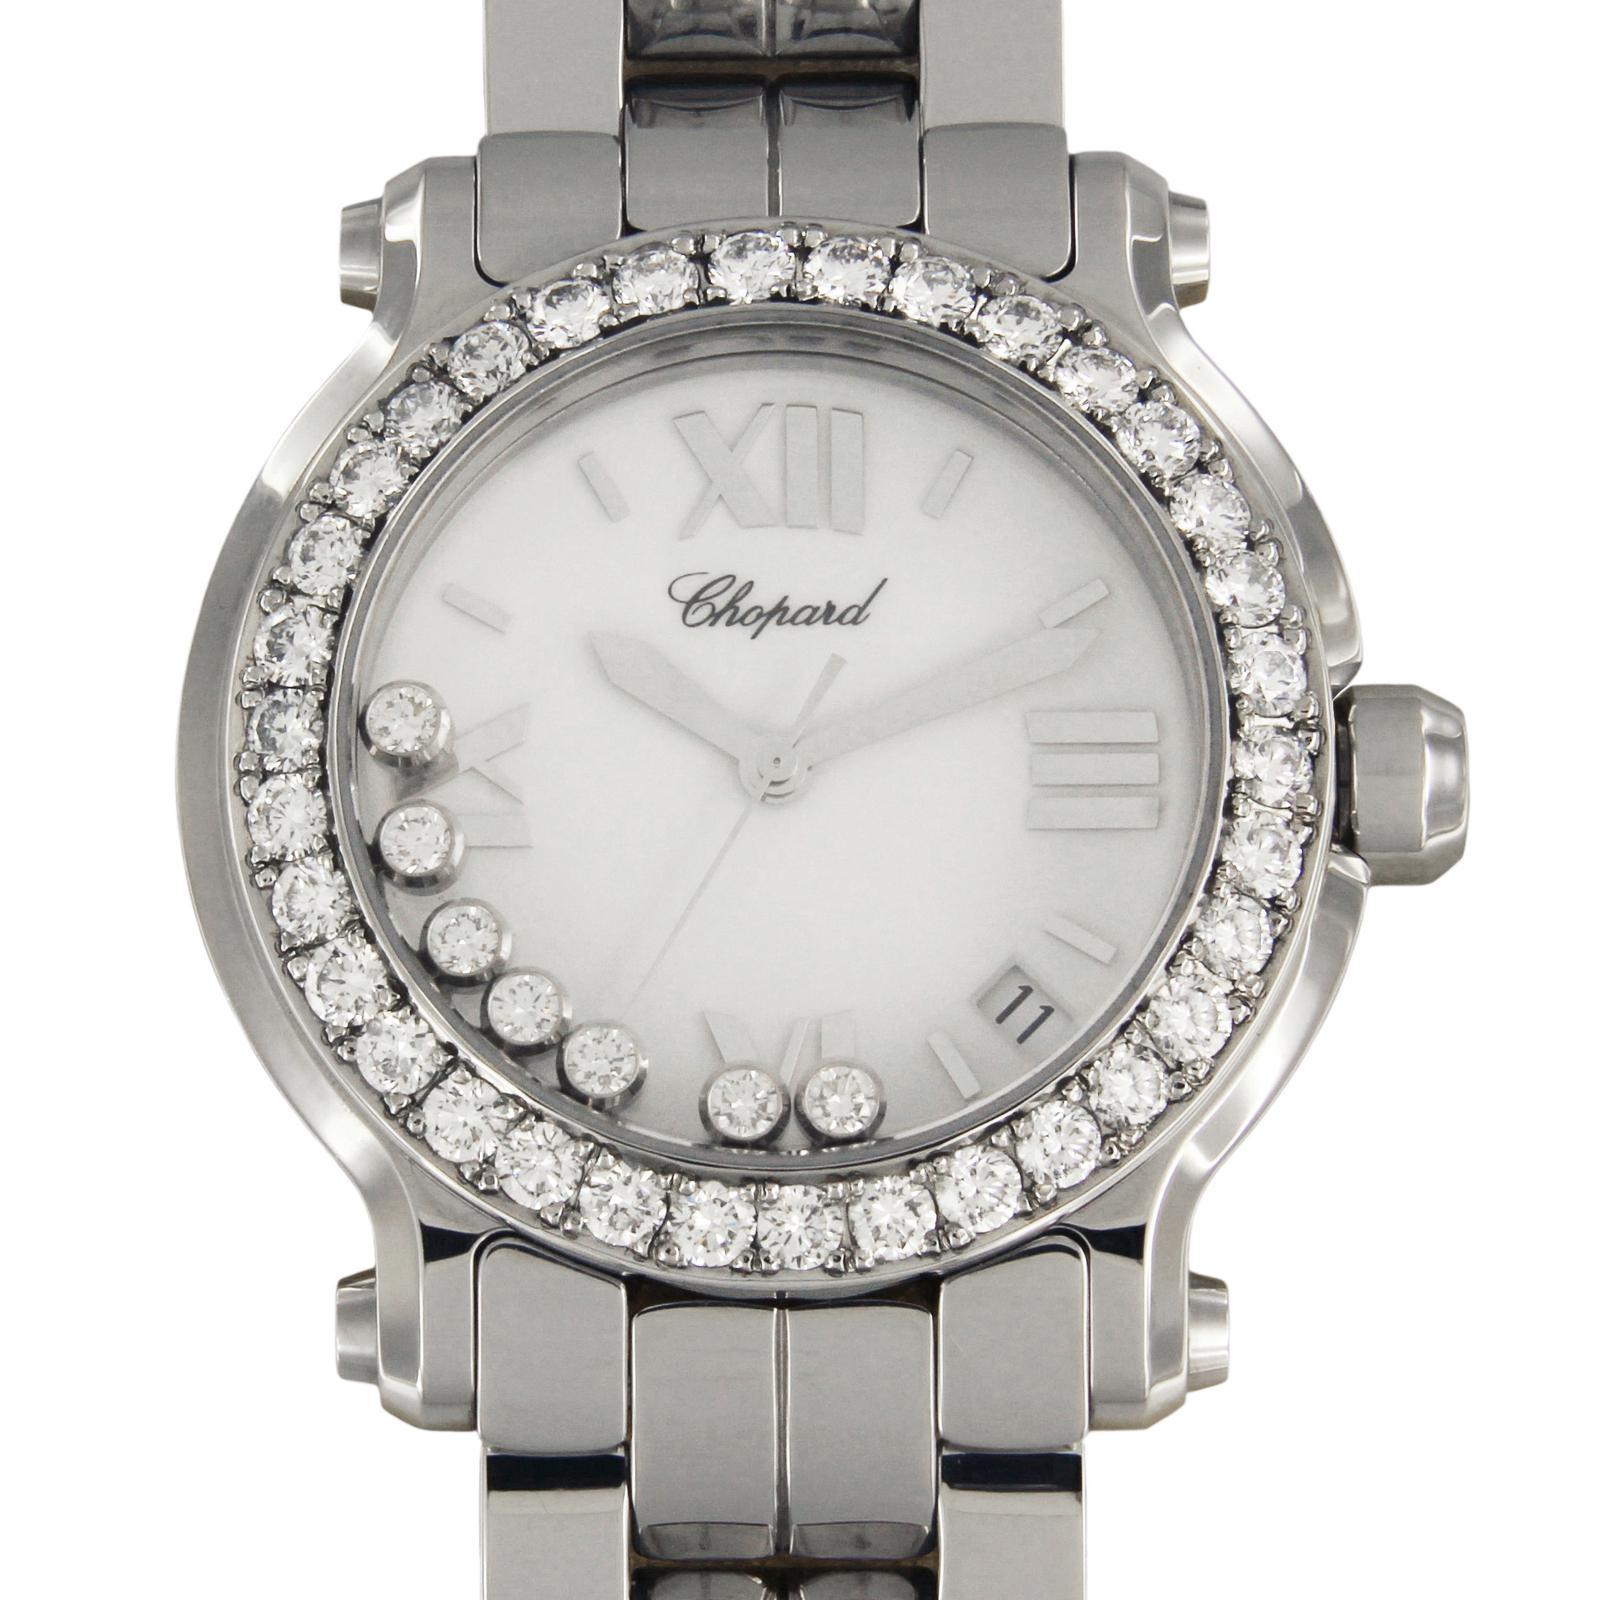 CHOPARD HAPPY SPORT 7 FLOATING DIAMONDS WATCH WITH DIAMOND BEZEL 278477-3002

-Movement: Swiss Quartz
-Case Size: 36mm
-Material: Stainless Steel
-Crystal: Scratch Resistant Sapphire
-Bezel: Diamond Bezel
-Dial: White Matte Dial with 7 Floating